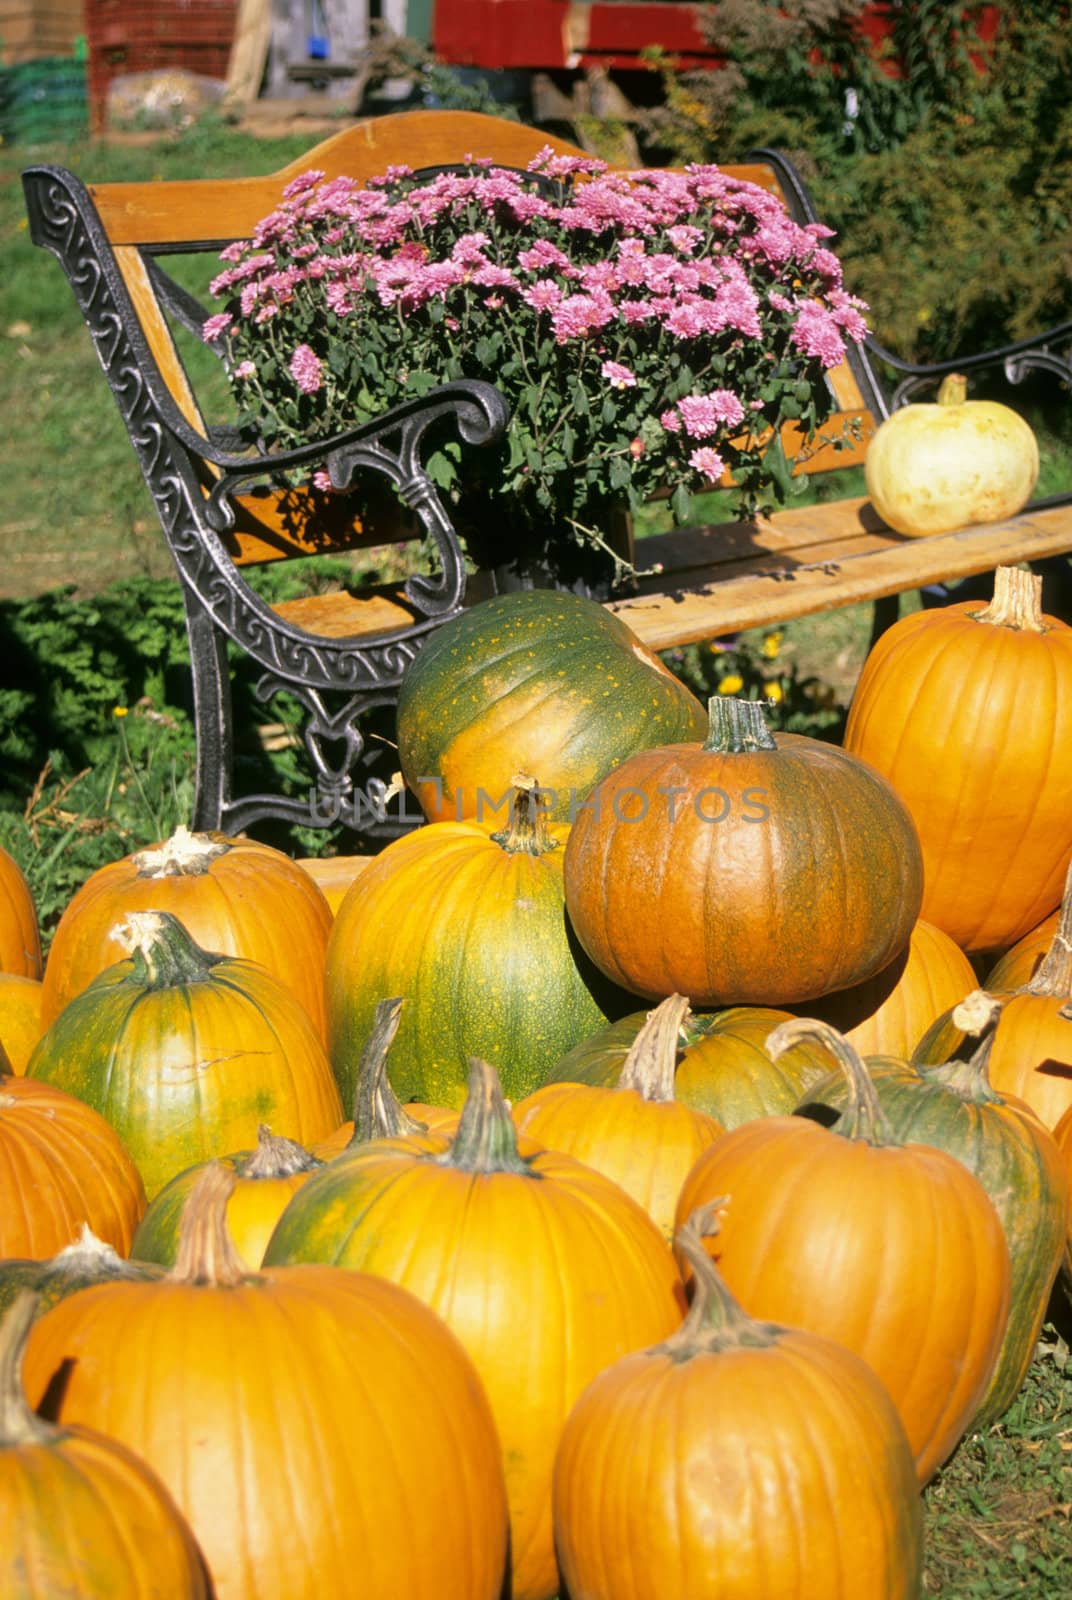 A pile of pumpkins sits beside a bench with colourful flowers at a farmers' market in rural Nova Scotia, Canada.